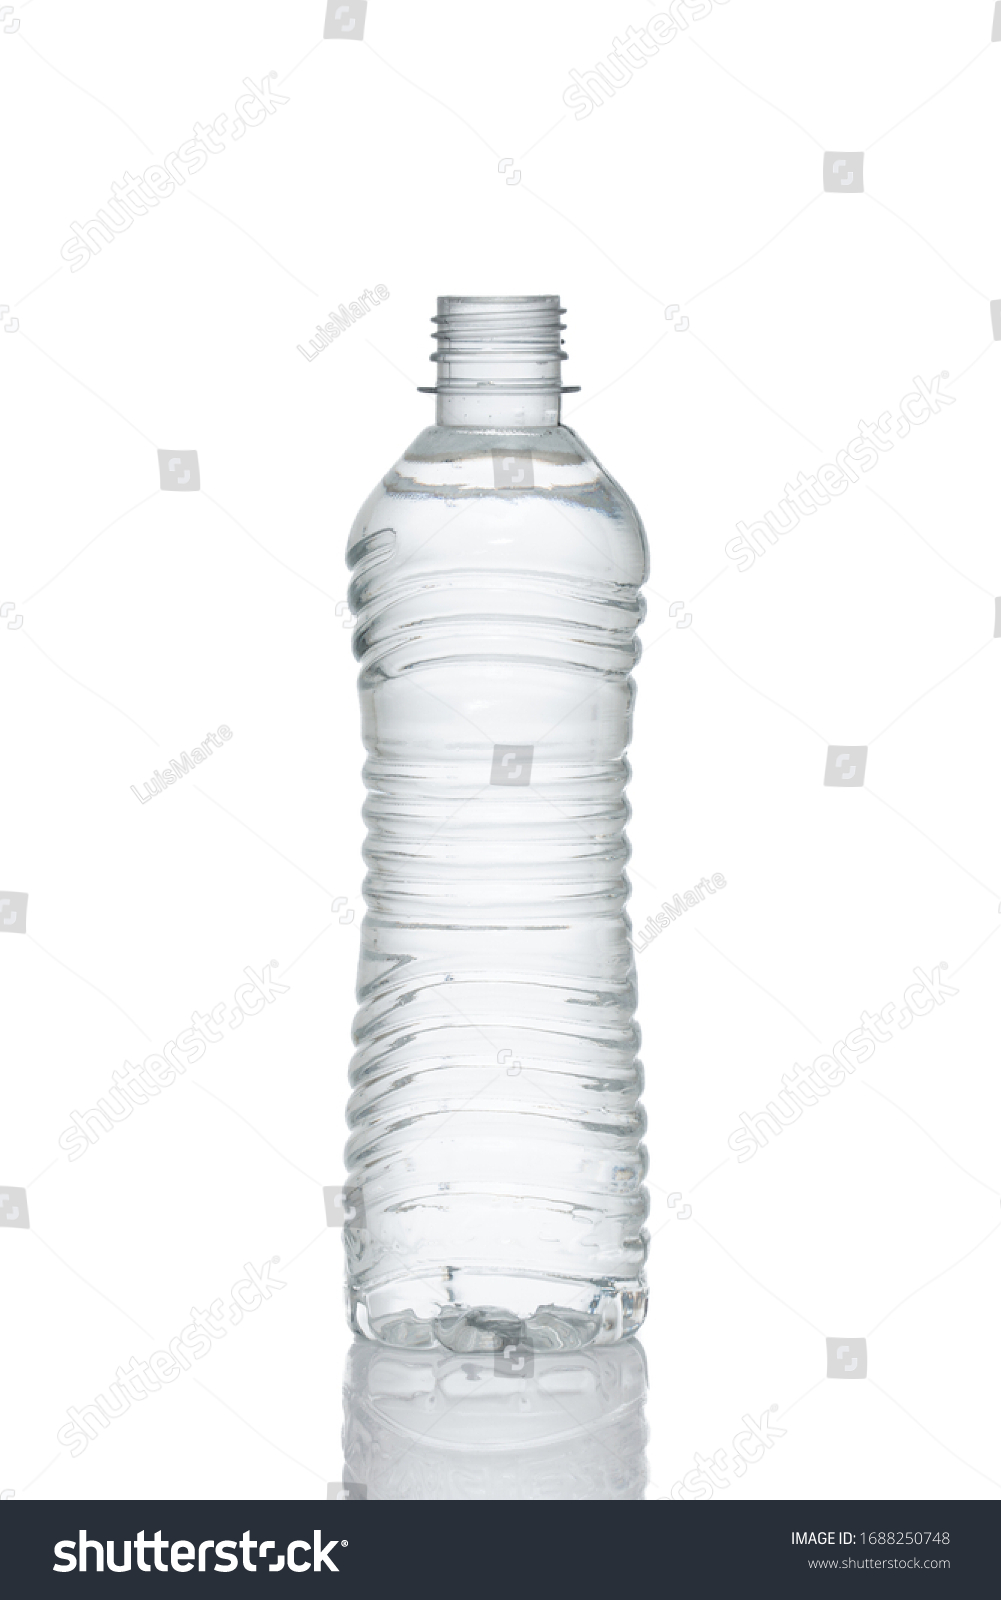 Transparent clear open water bottle on white background for mockup design front view without cap #1688250748